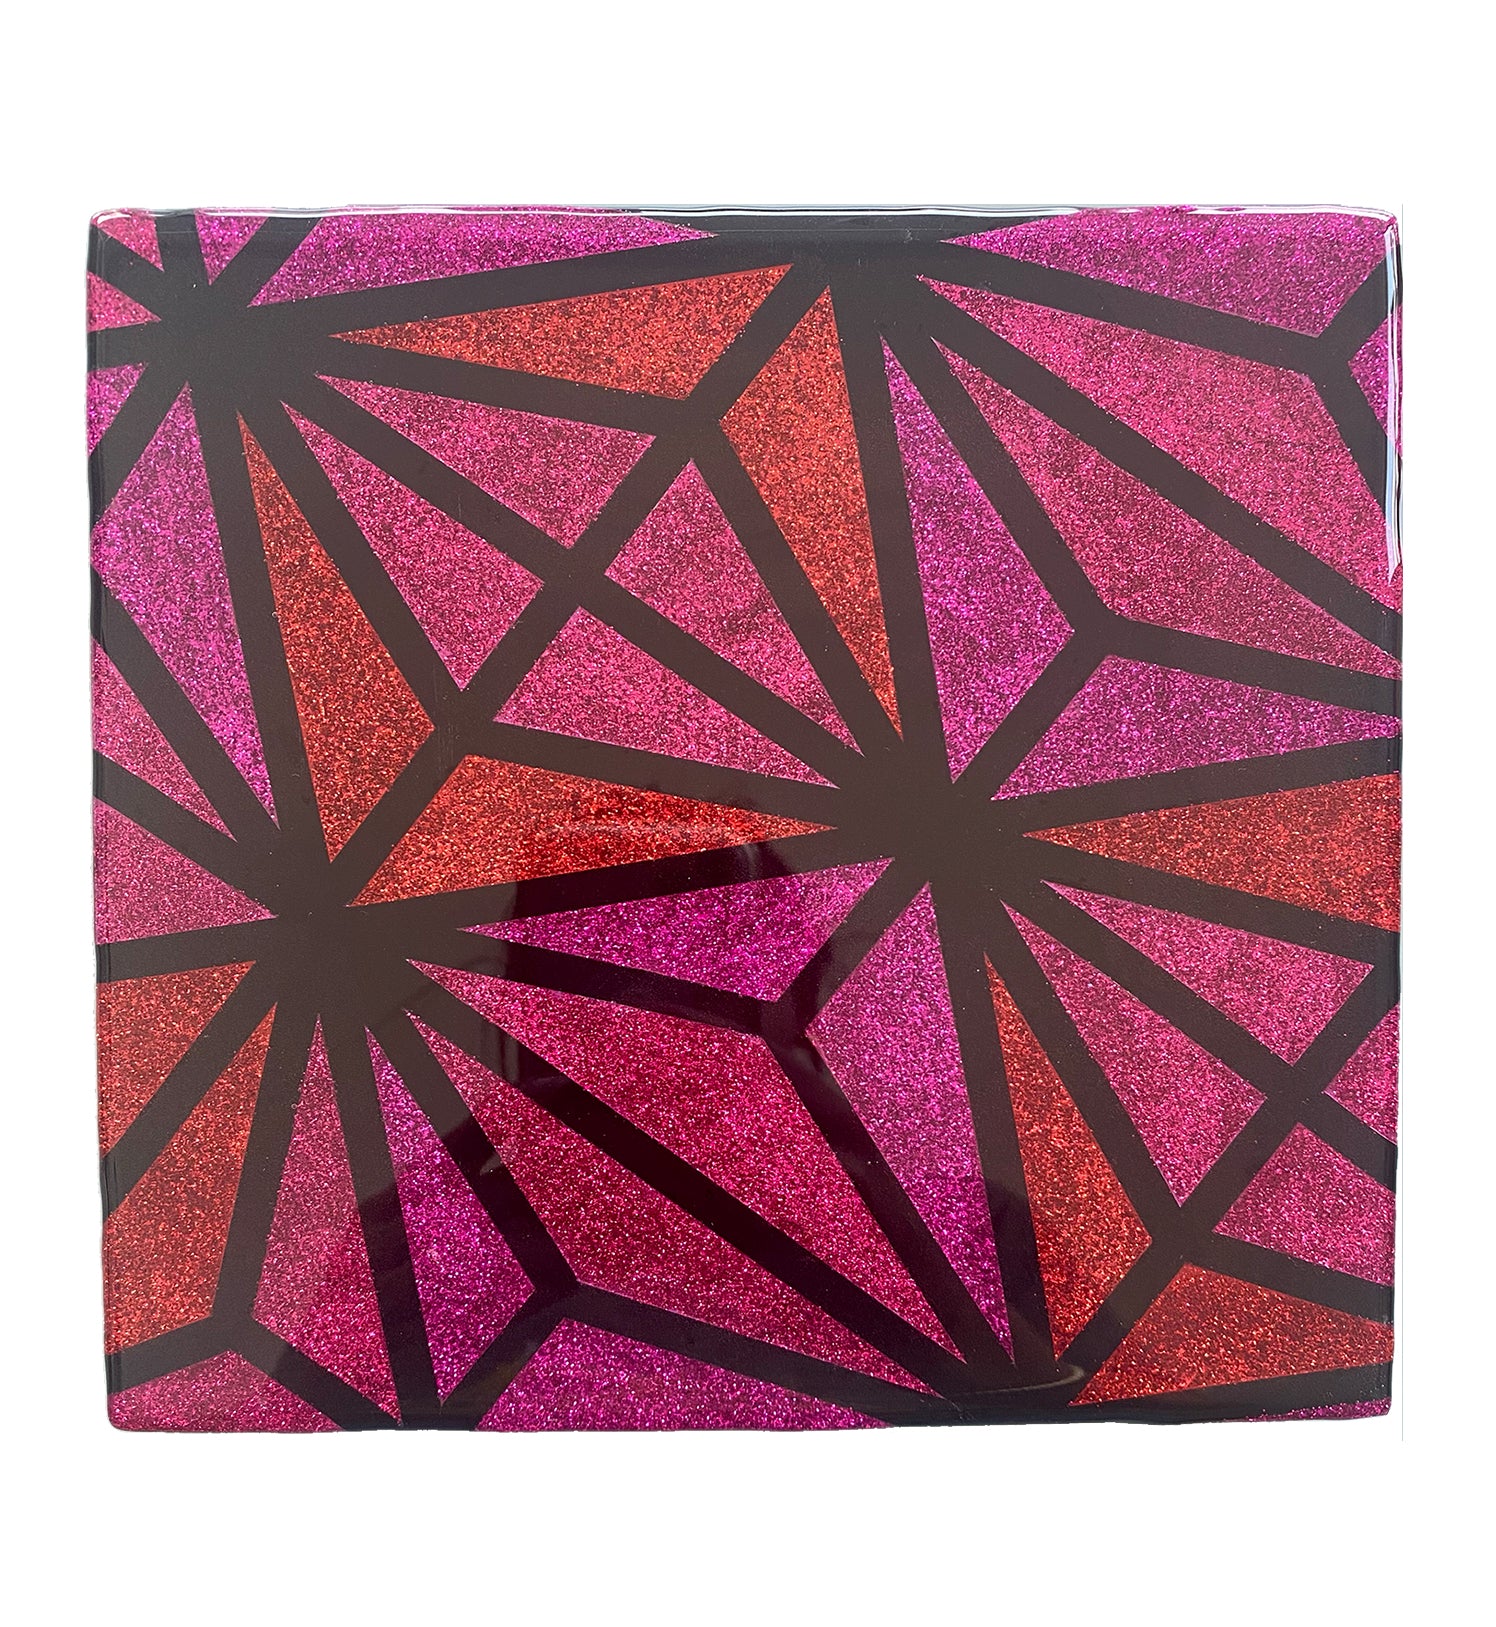 Geometric Pink Care May Art and Mixed Triangles Glitter – Devils Media Resin Wall